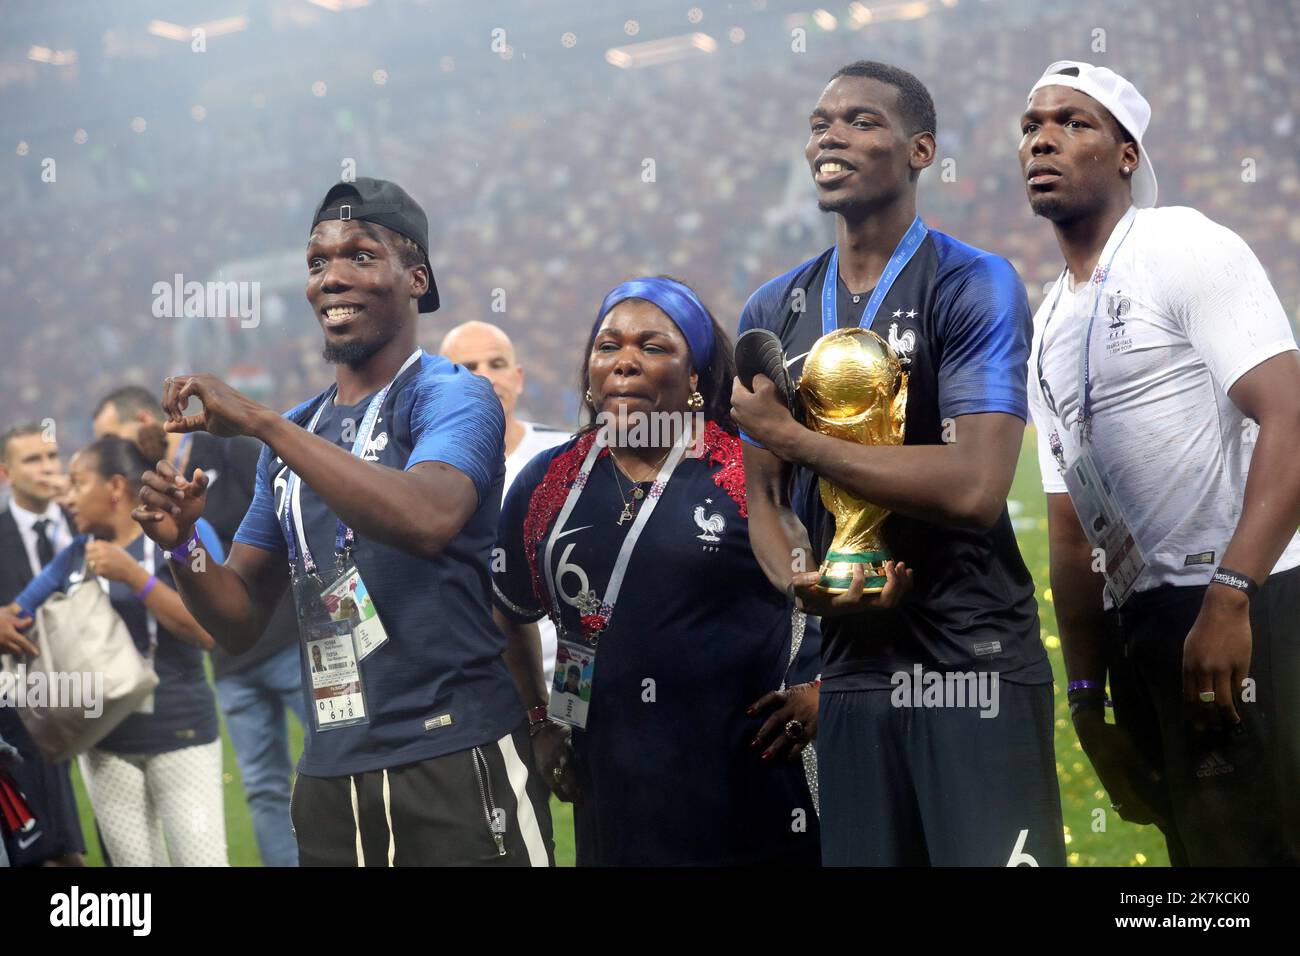 ©PHOTOPQR/LE PARISIEN/LP / ARNAUD JOURNOIS ; MOSCOU ; 15/09/2022 ; Finale de la coupe du Monde de football Russie 2018 au stade Loujniki à Moscou. 15/07/2018. France - Croatie / LA FAMILLE POGBA AU TOUR DE PAUL , YEO MORIBA SA MERE ET SES FRERES FLORENTIN ET MATHIAS ( EN BLANC ) POSE AVEC LA COUPE DU MONDE - FILES 2018 of Soccer World Cup in Russia - Paul Pogba 'threatened by gangsters' - as his brother (now in jail)vows to make 'explosive' claims about him Pogba is a few months away from the World Cup, but the Juventus footballer is now the subject of vague and unsubstantiated claims made by Stock Photo